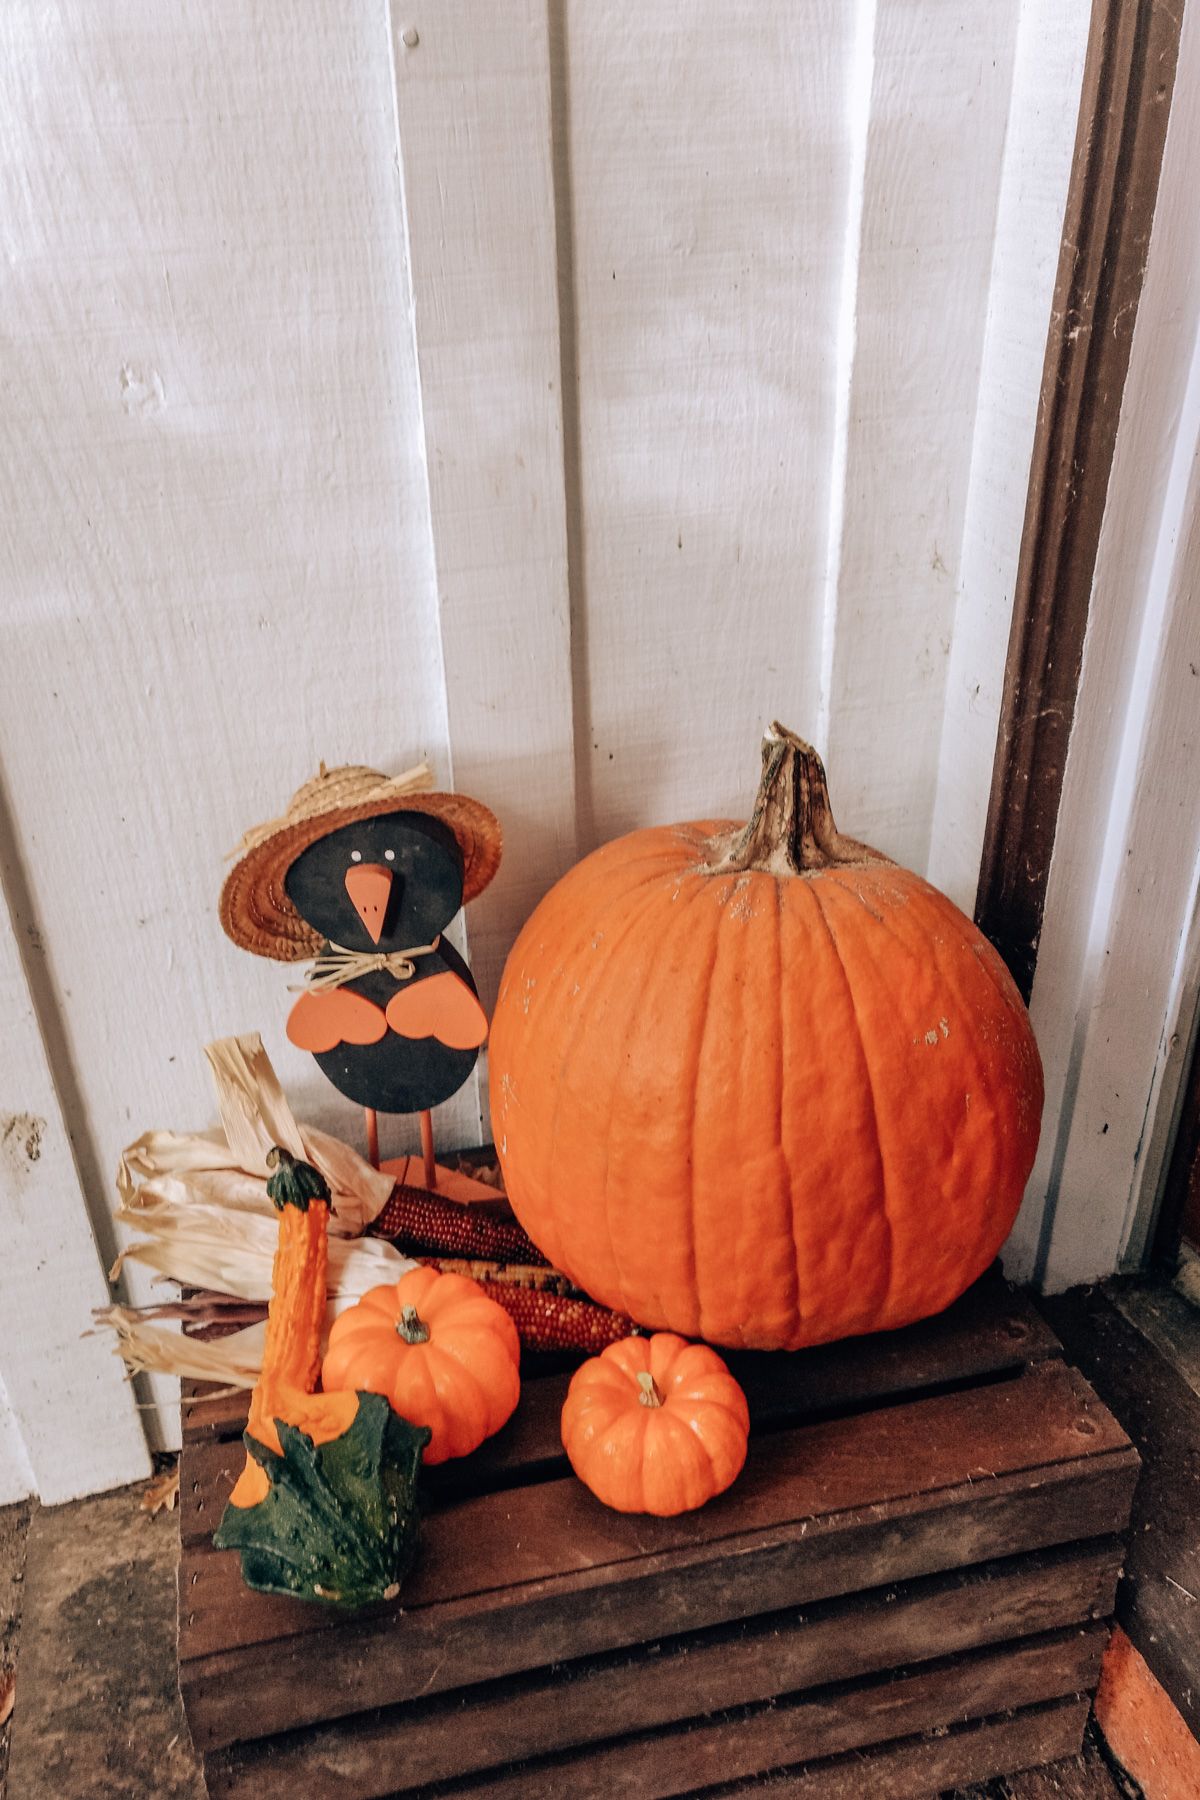 Halloween Events in Sacramento: A front porch display of pumpkins, decorative gourds, and Indian corn sitting on a wooden crate.